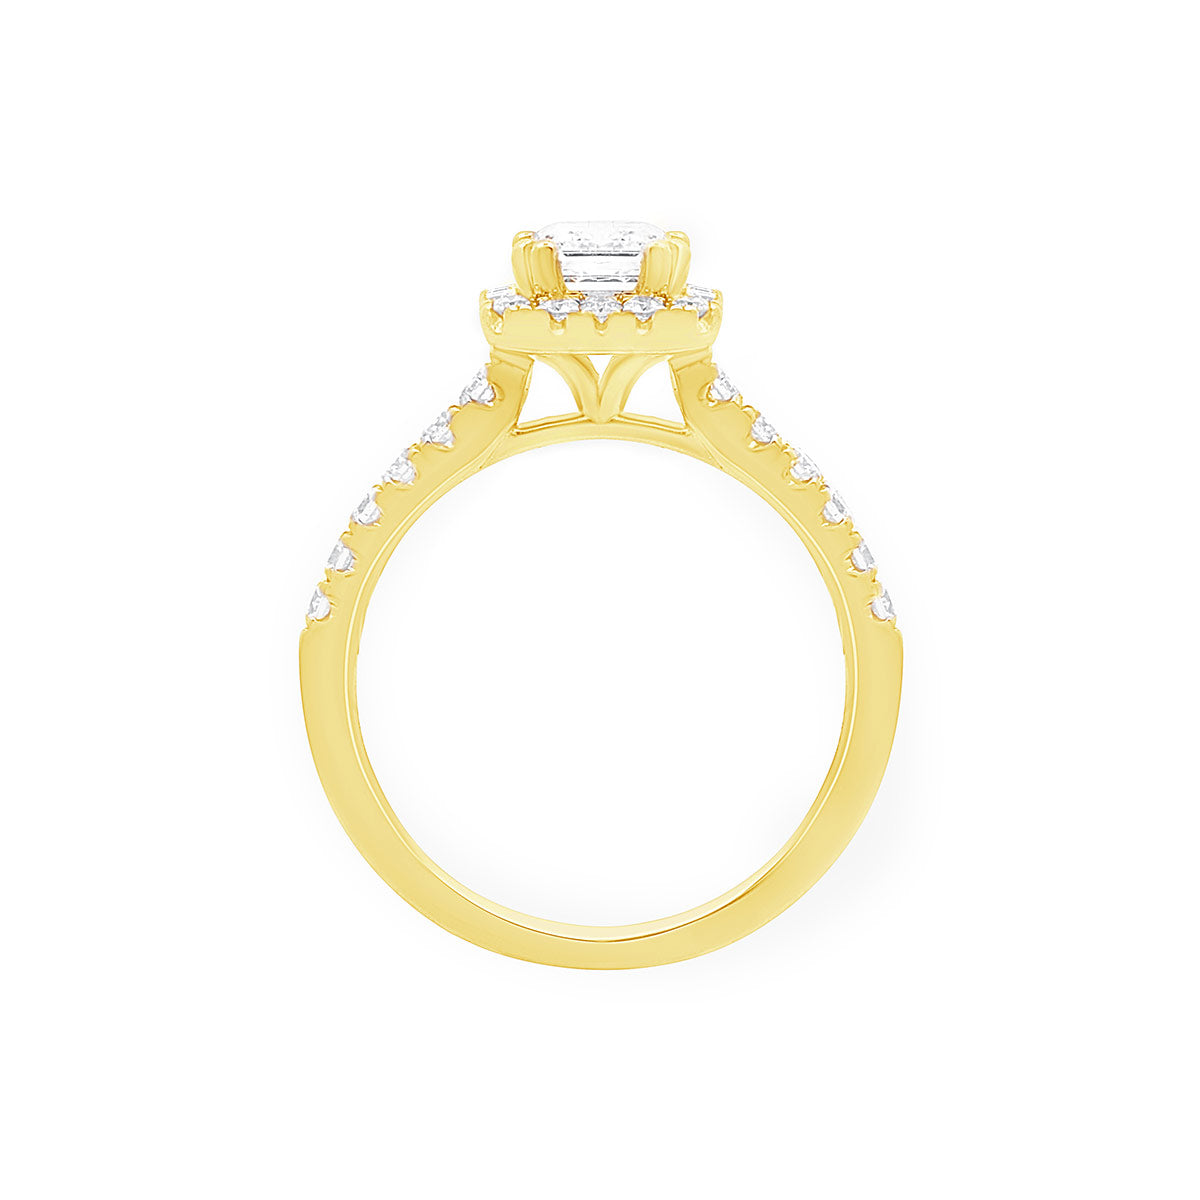 Emerald Shape Halo Ring in YELLOW GOLD STANDING VERTICAL 